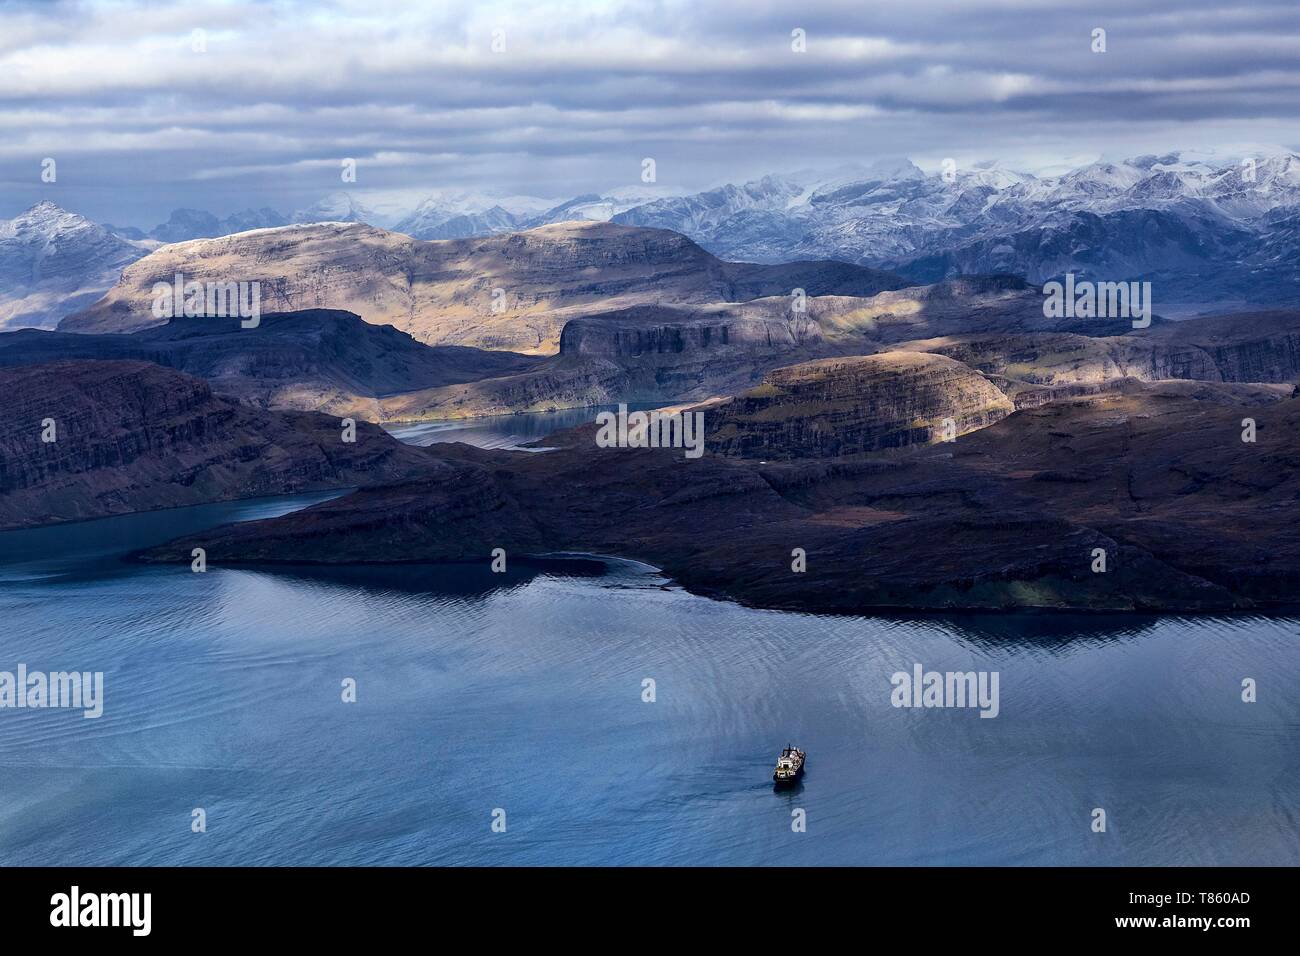 France, French Southern and Antarctic Lands, Kerguelen Islands, Rallier du Baty Peninsula, Baie de la Table, the Marion Dufresne (supply ship of French Southern and Antarctic Territories) at anchor for supplying huts by helicopter. In the background the snow-capped mounts of the Rallier du Baty Peninsula (aerial view) Stock Photo